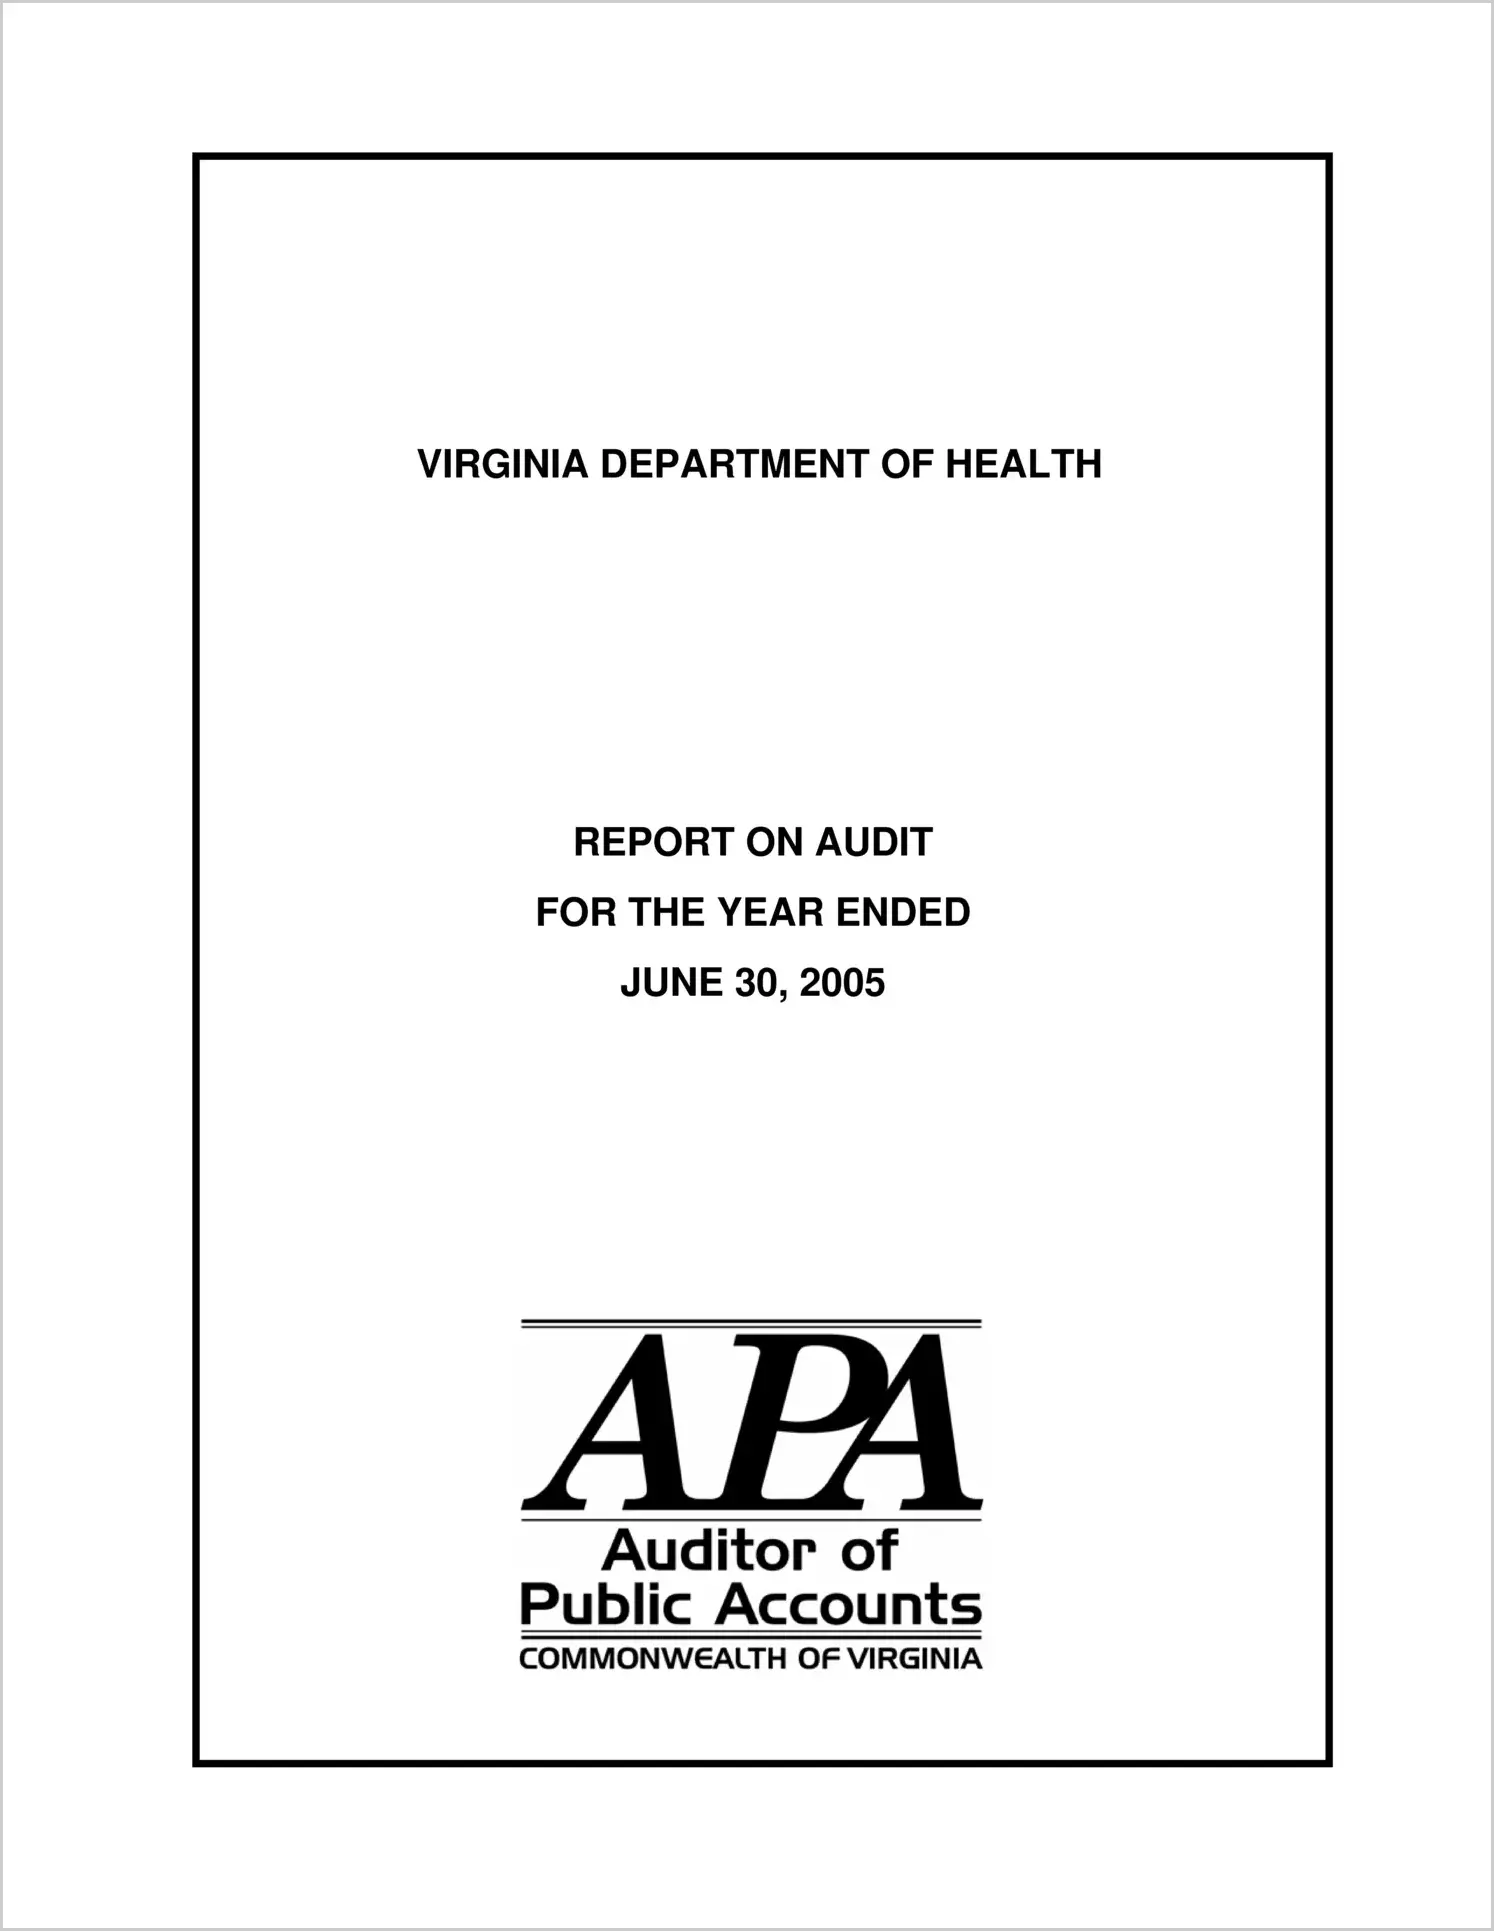 Department of Health for the year ended June 30, 2005